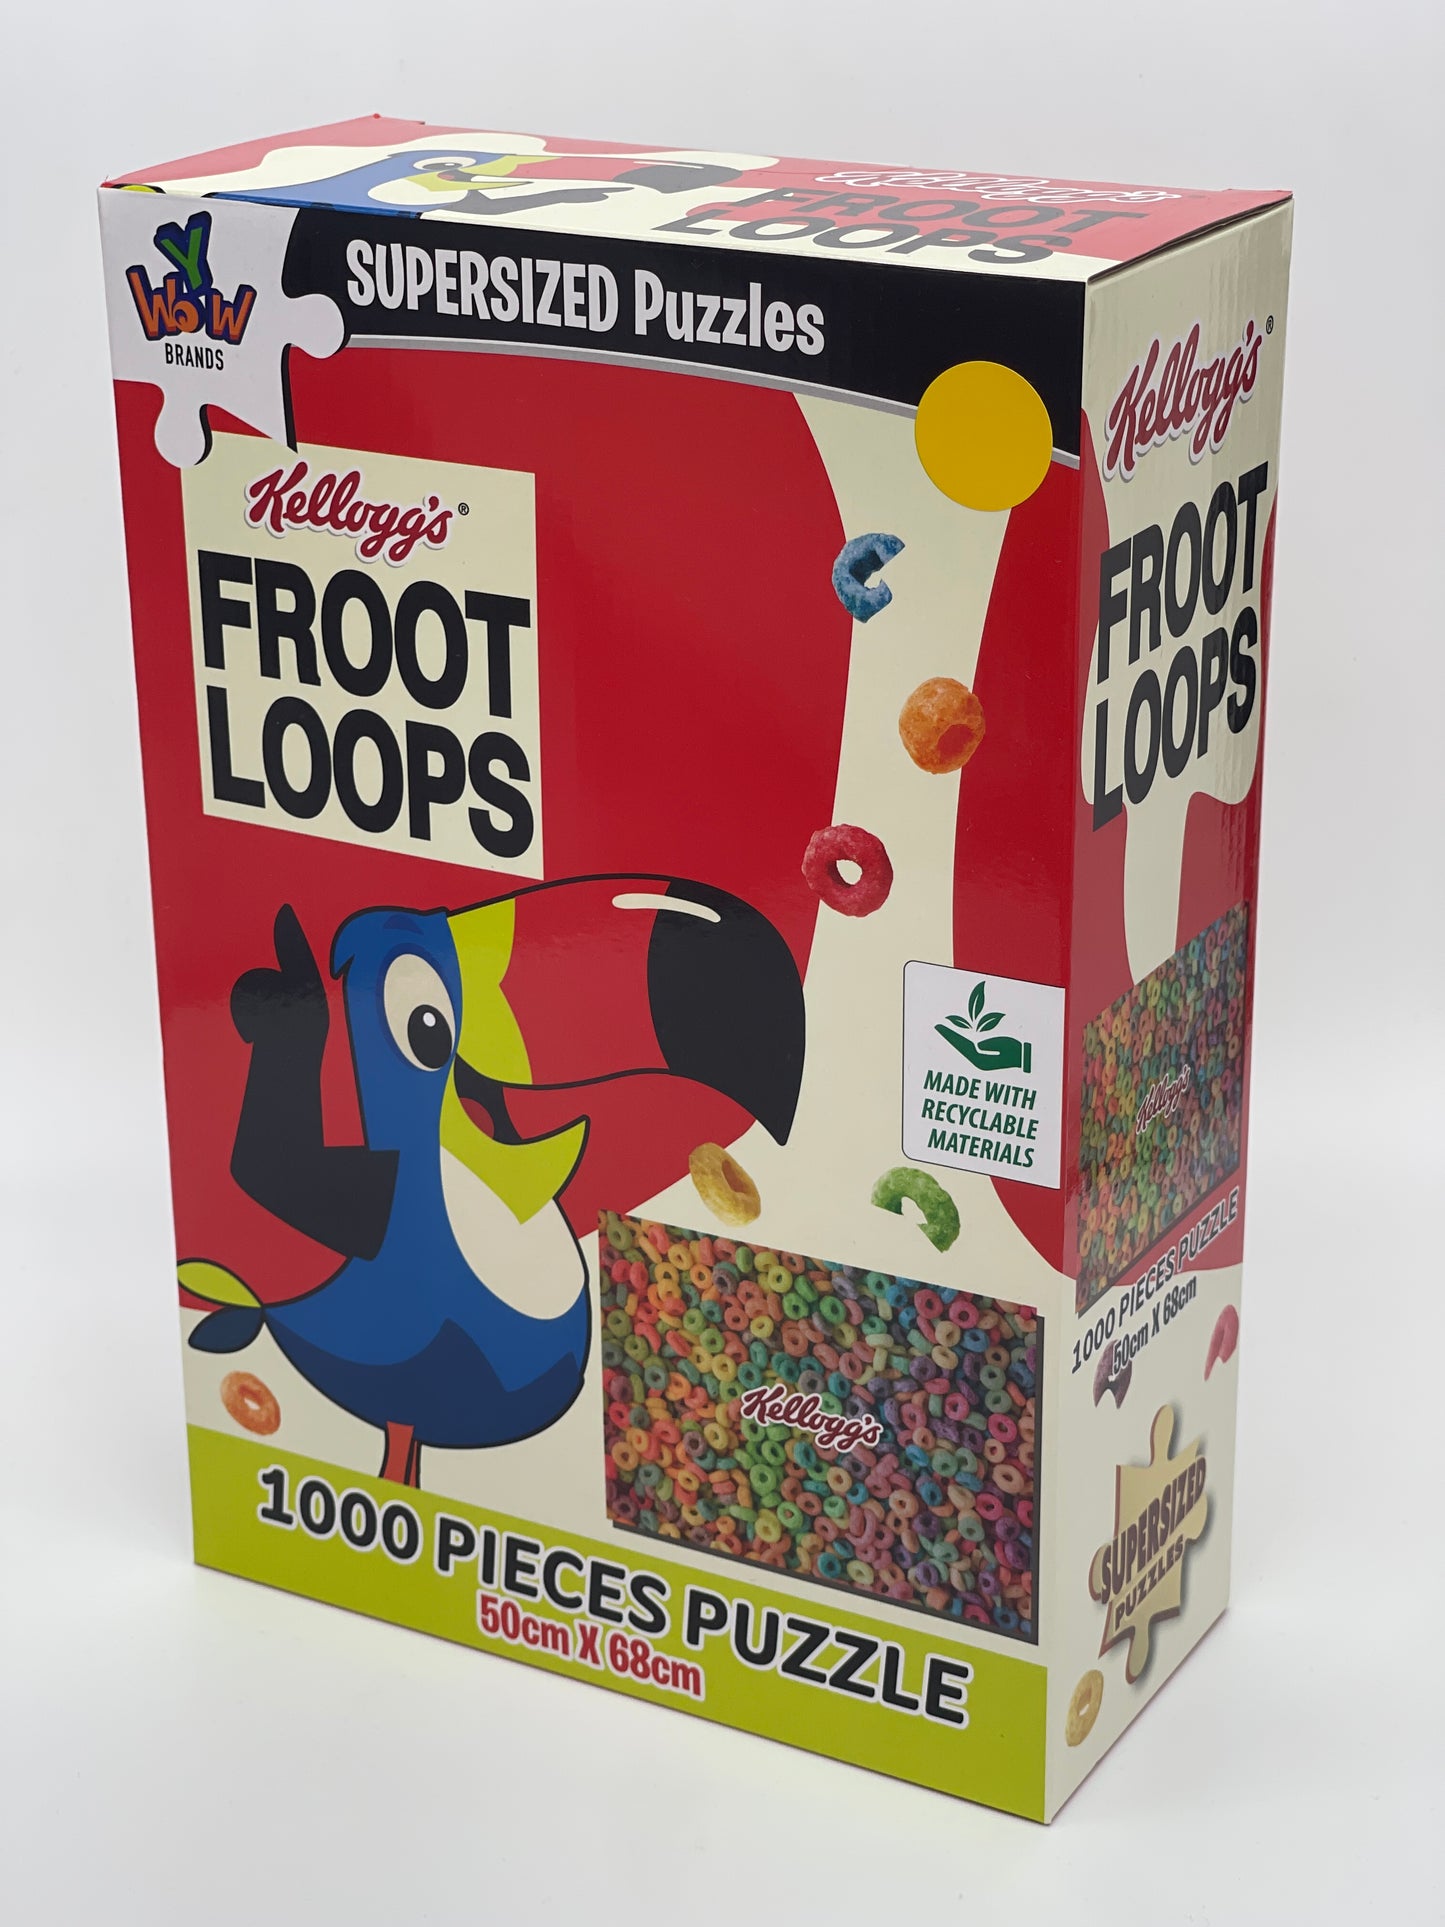 Kellogg's Froot Loops 1000 Piece Jigsaw Puzzle 50 x 68 cm Supersized Puzzle / Puzzle